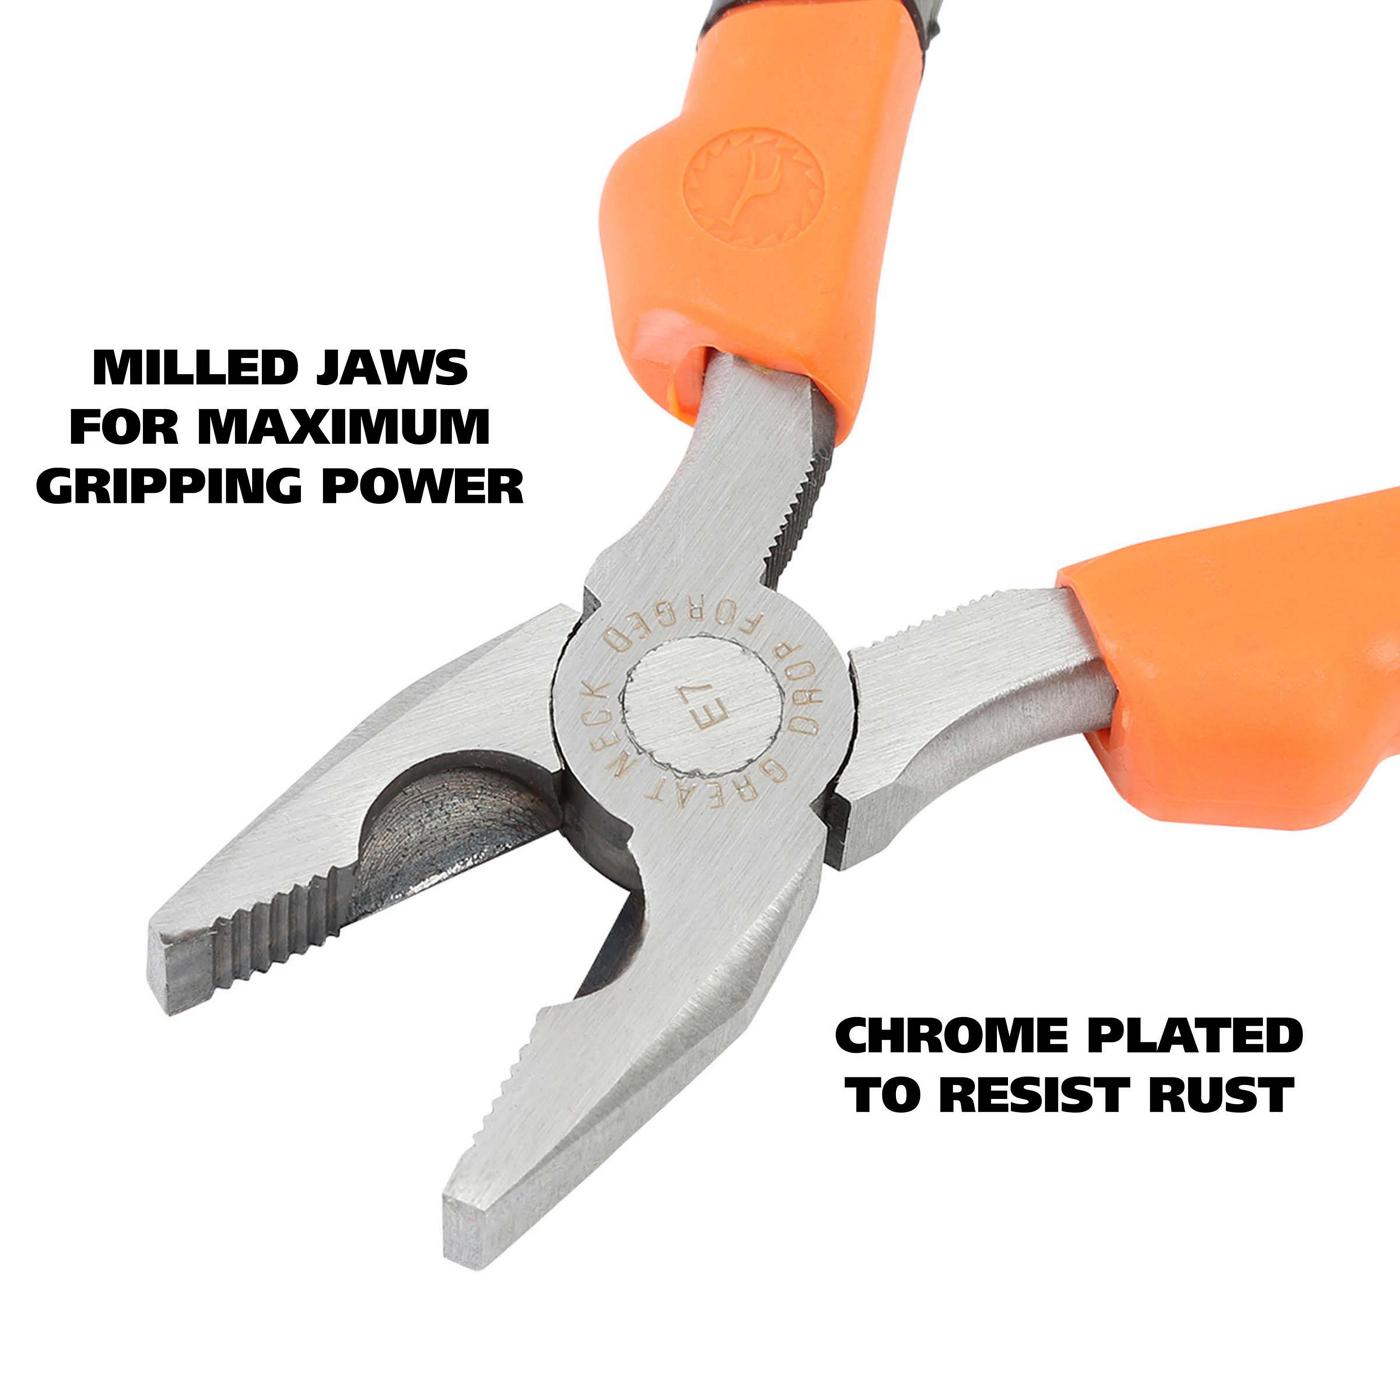 Great Neck Curved Jaw Locking Pliers - Shop Hand Tools at H-E-B